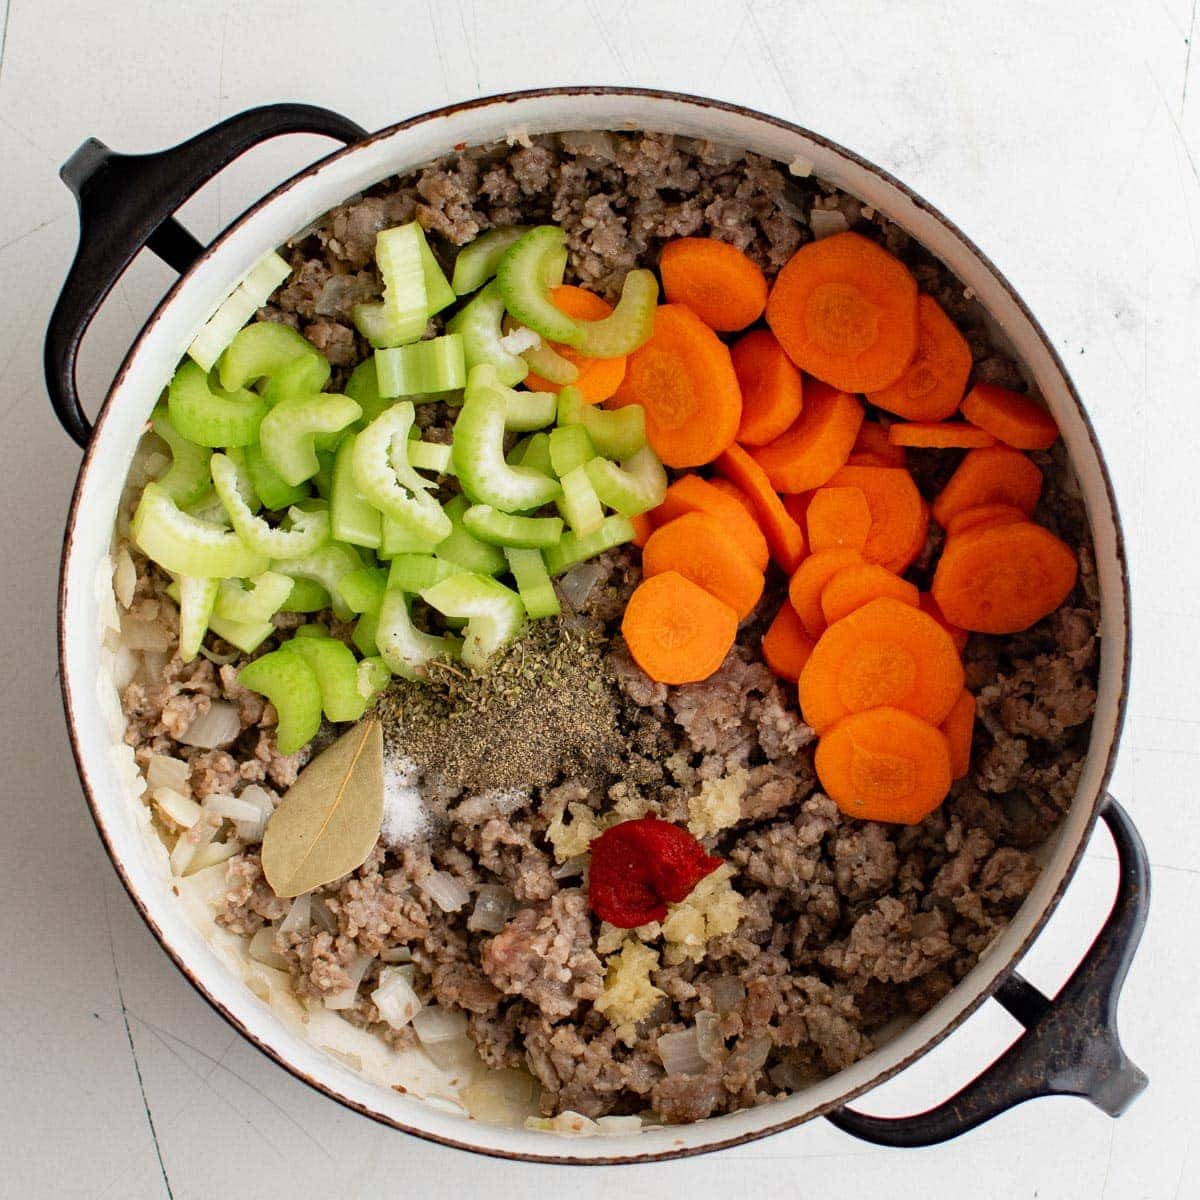 cooked sausage, carrots, celery and spices